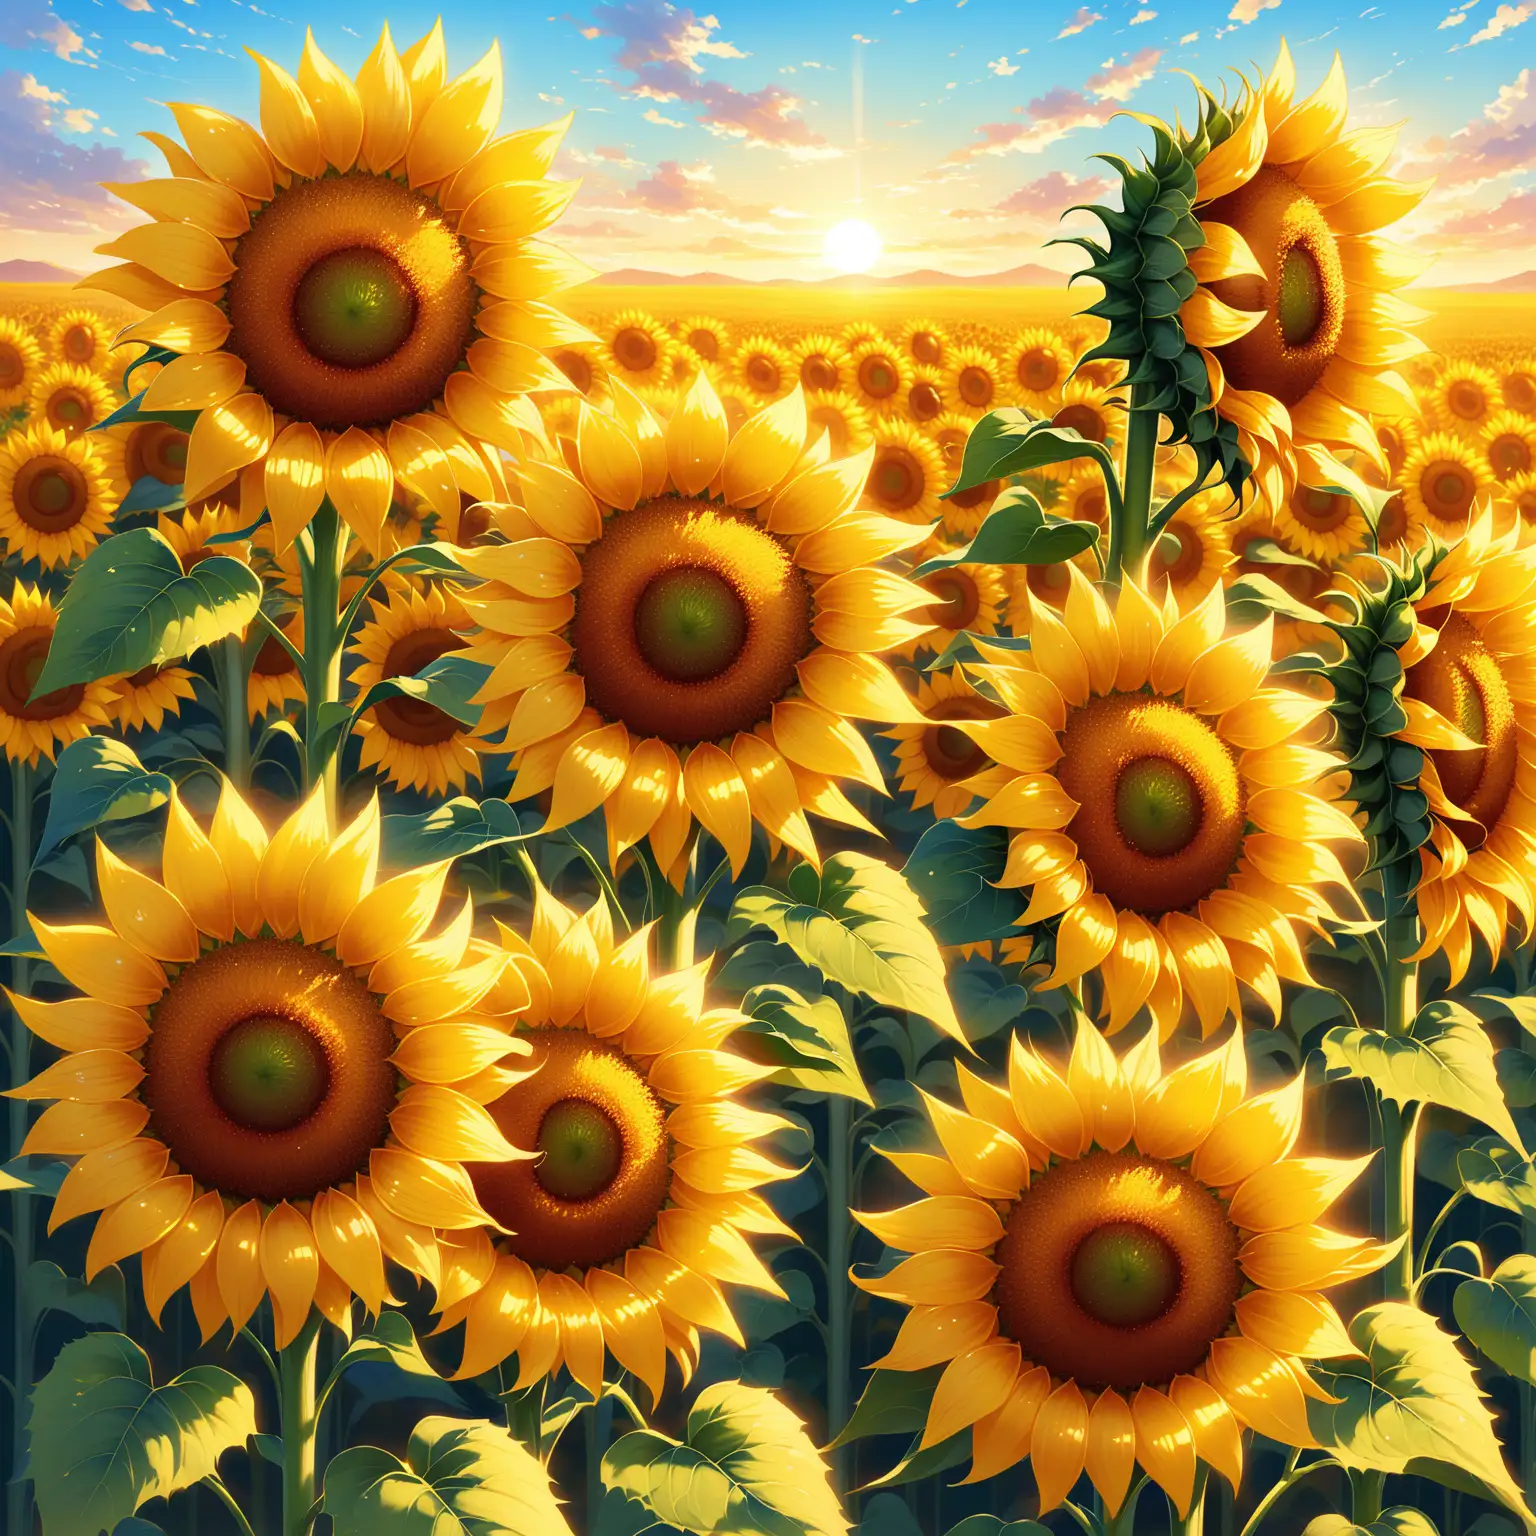 Vibrant Sunflowers Blooming in a Summer Field